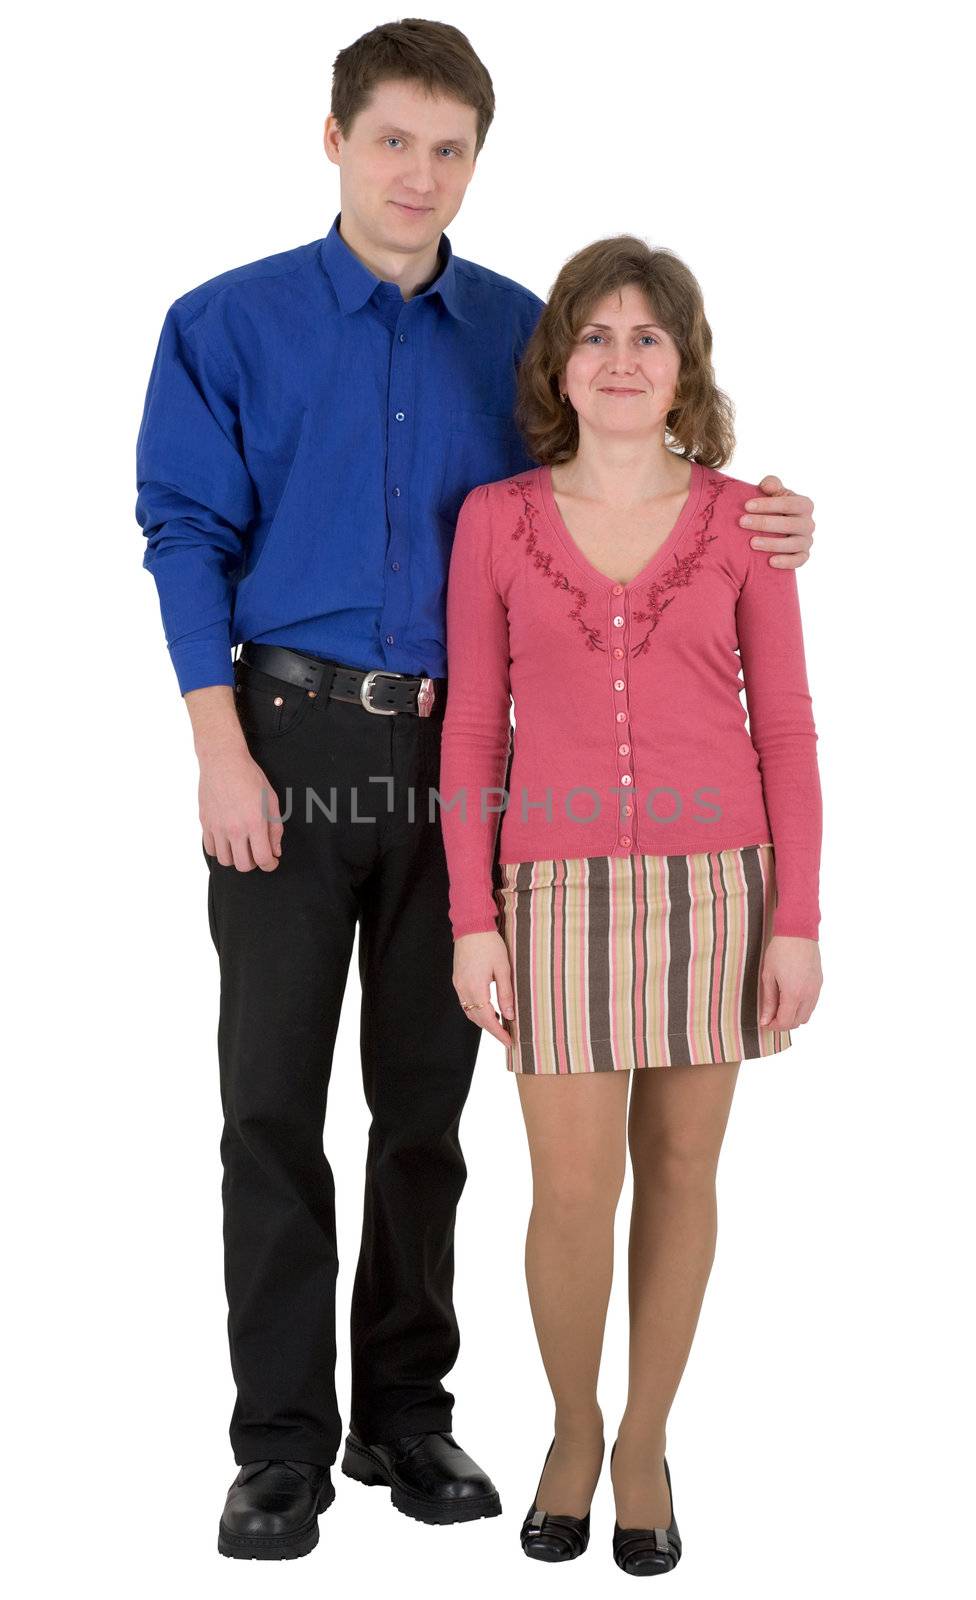 Man and woman on a white background